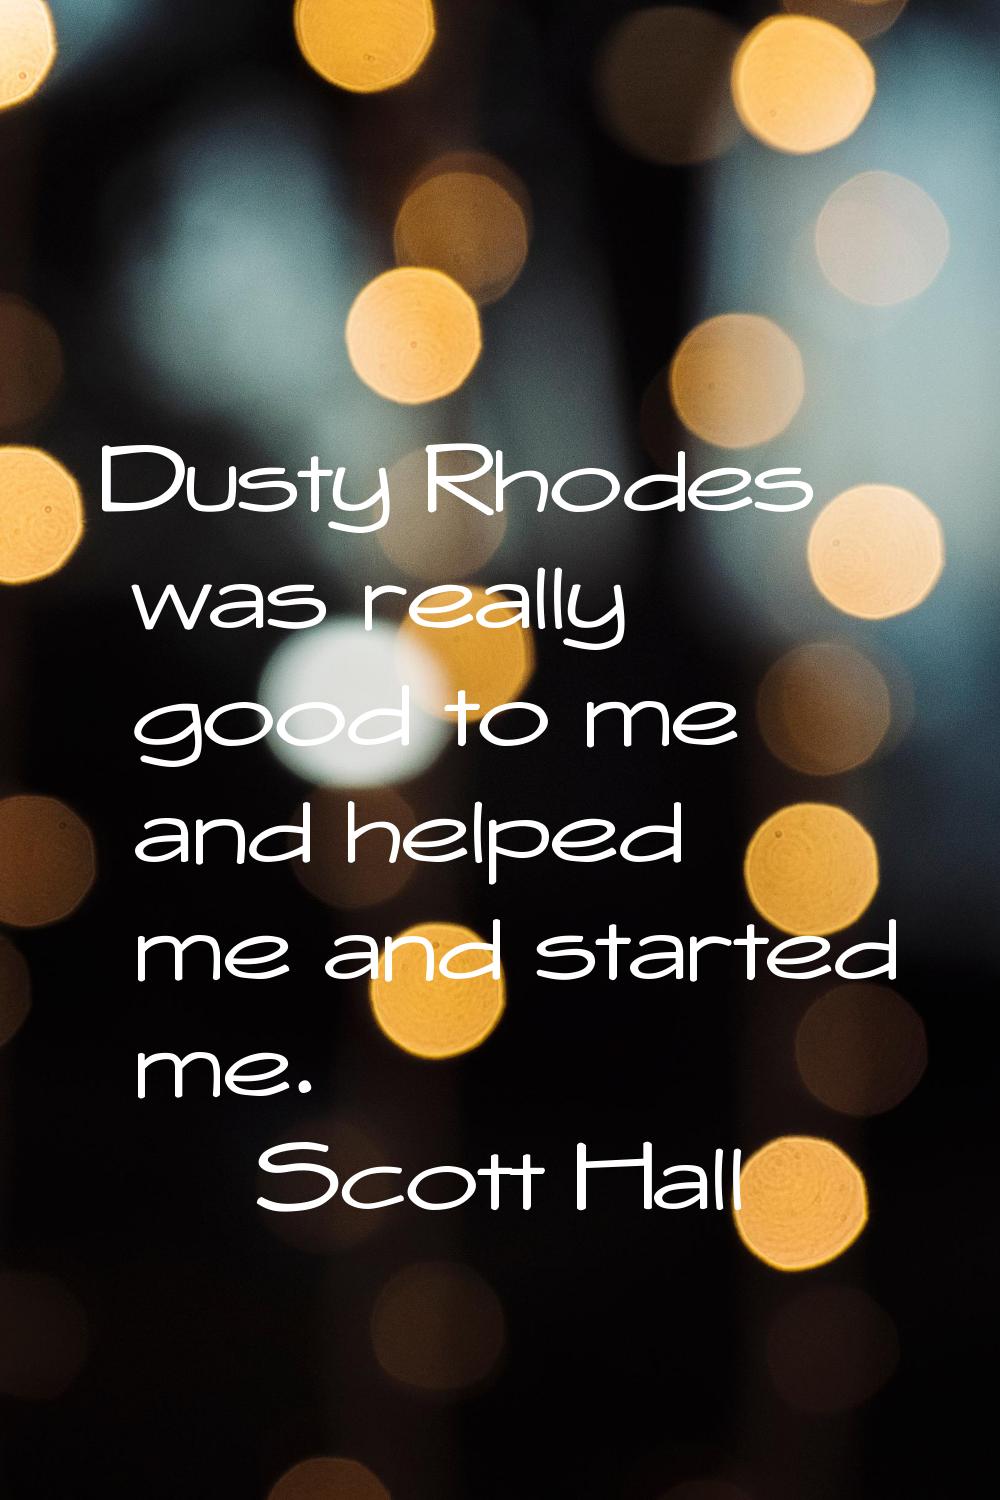 Dusty Rhodes was really good to me and helped me and started me.